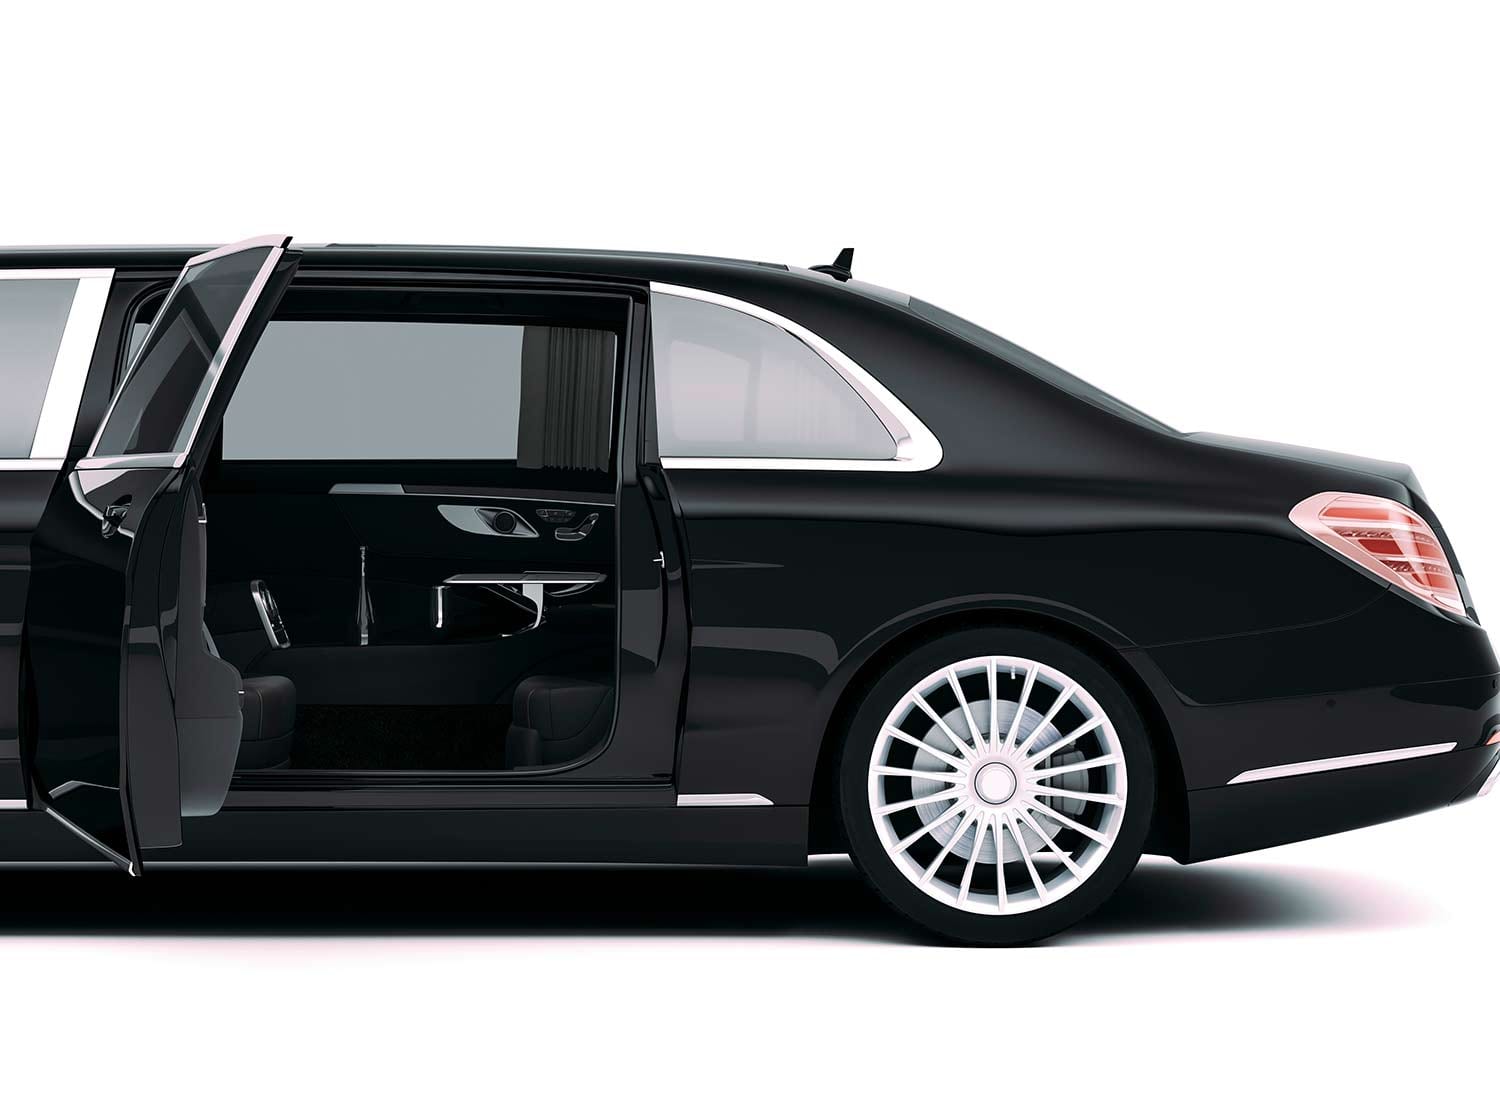 Clearwater Limo - Black Limousine